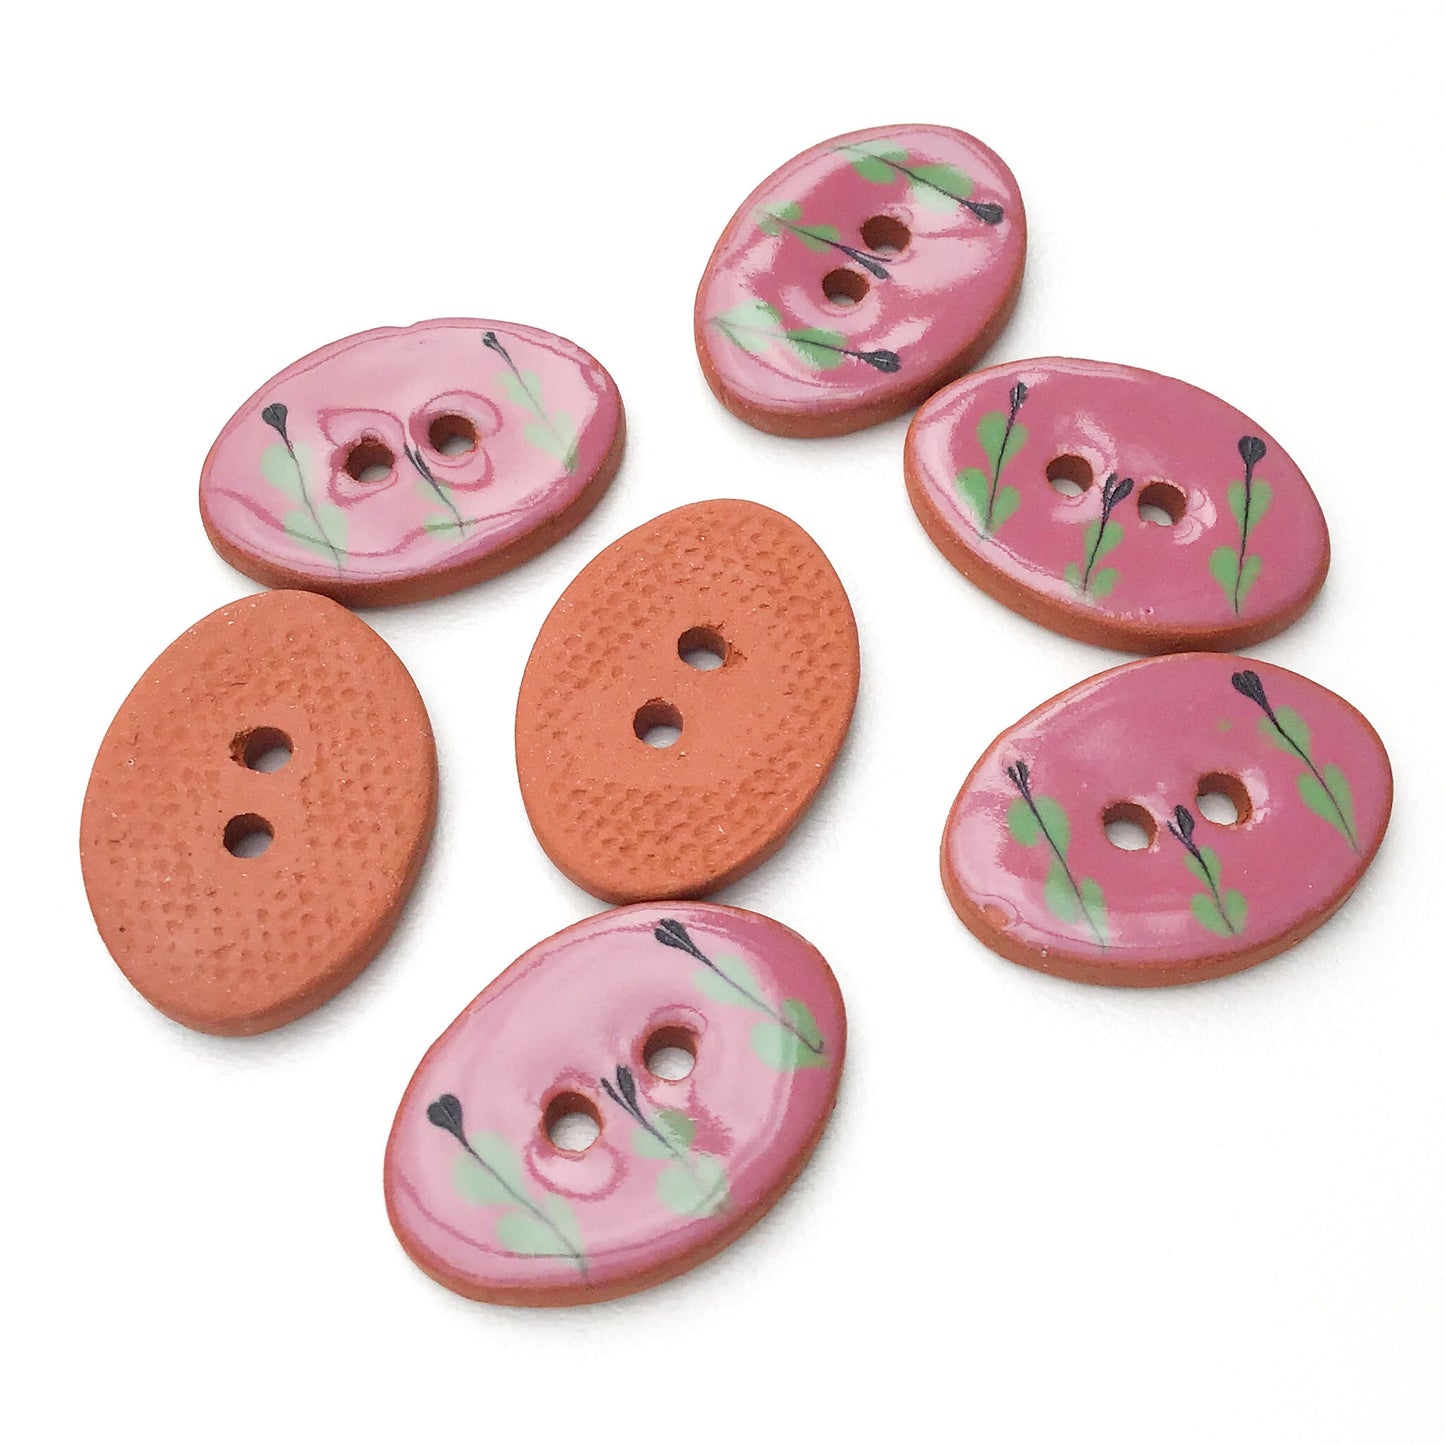 Oval Ceramic Buttons - Hand Painted Clay Buttons with Small Flower Detail - Mauve + Green - 5/8" x 7/8" - 7 Pack